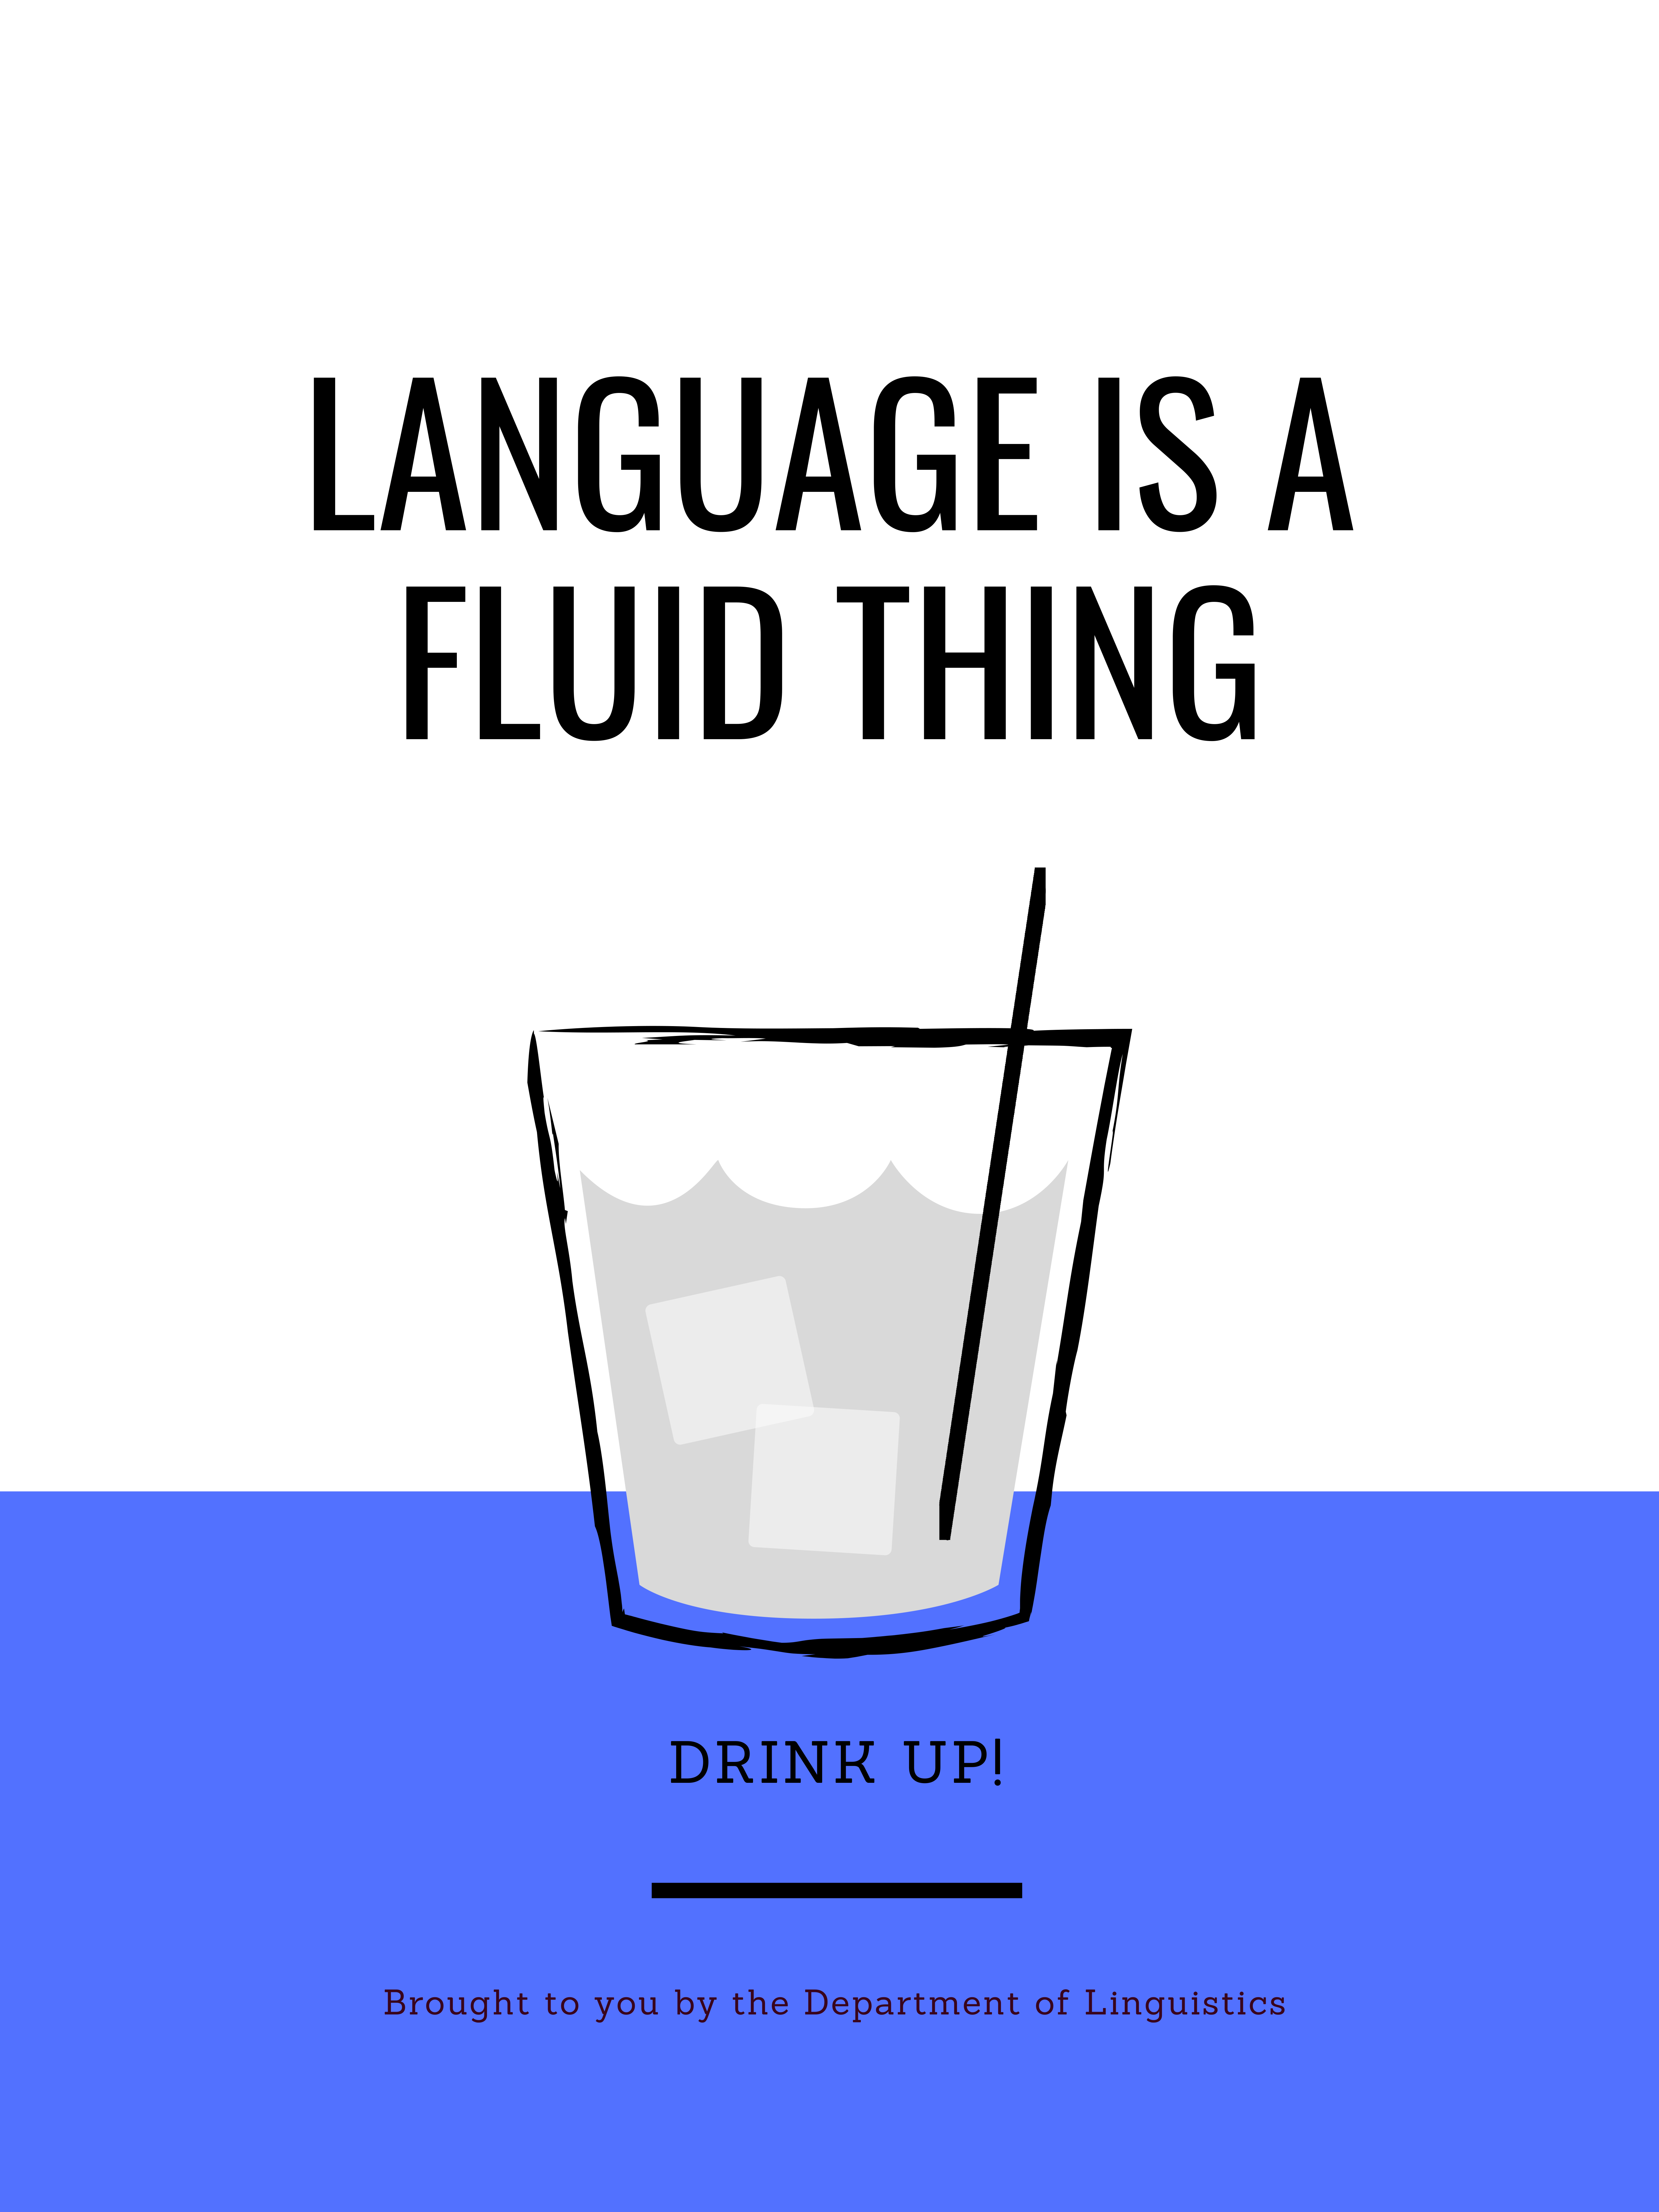 Linguistics Poster. Language is a fluid thing. Drink up! Brought to you by the Department of Linguistics. Shows a drinking glass with ice and a straw.